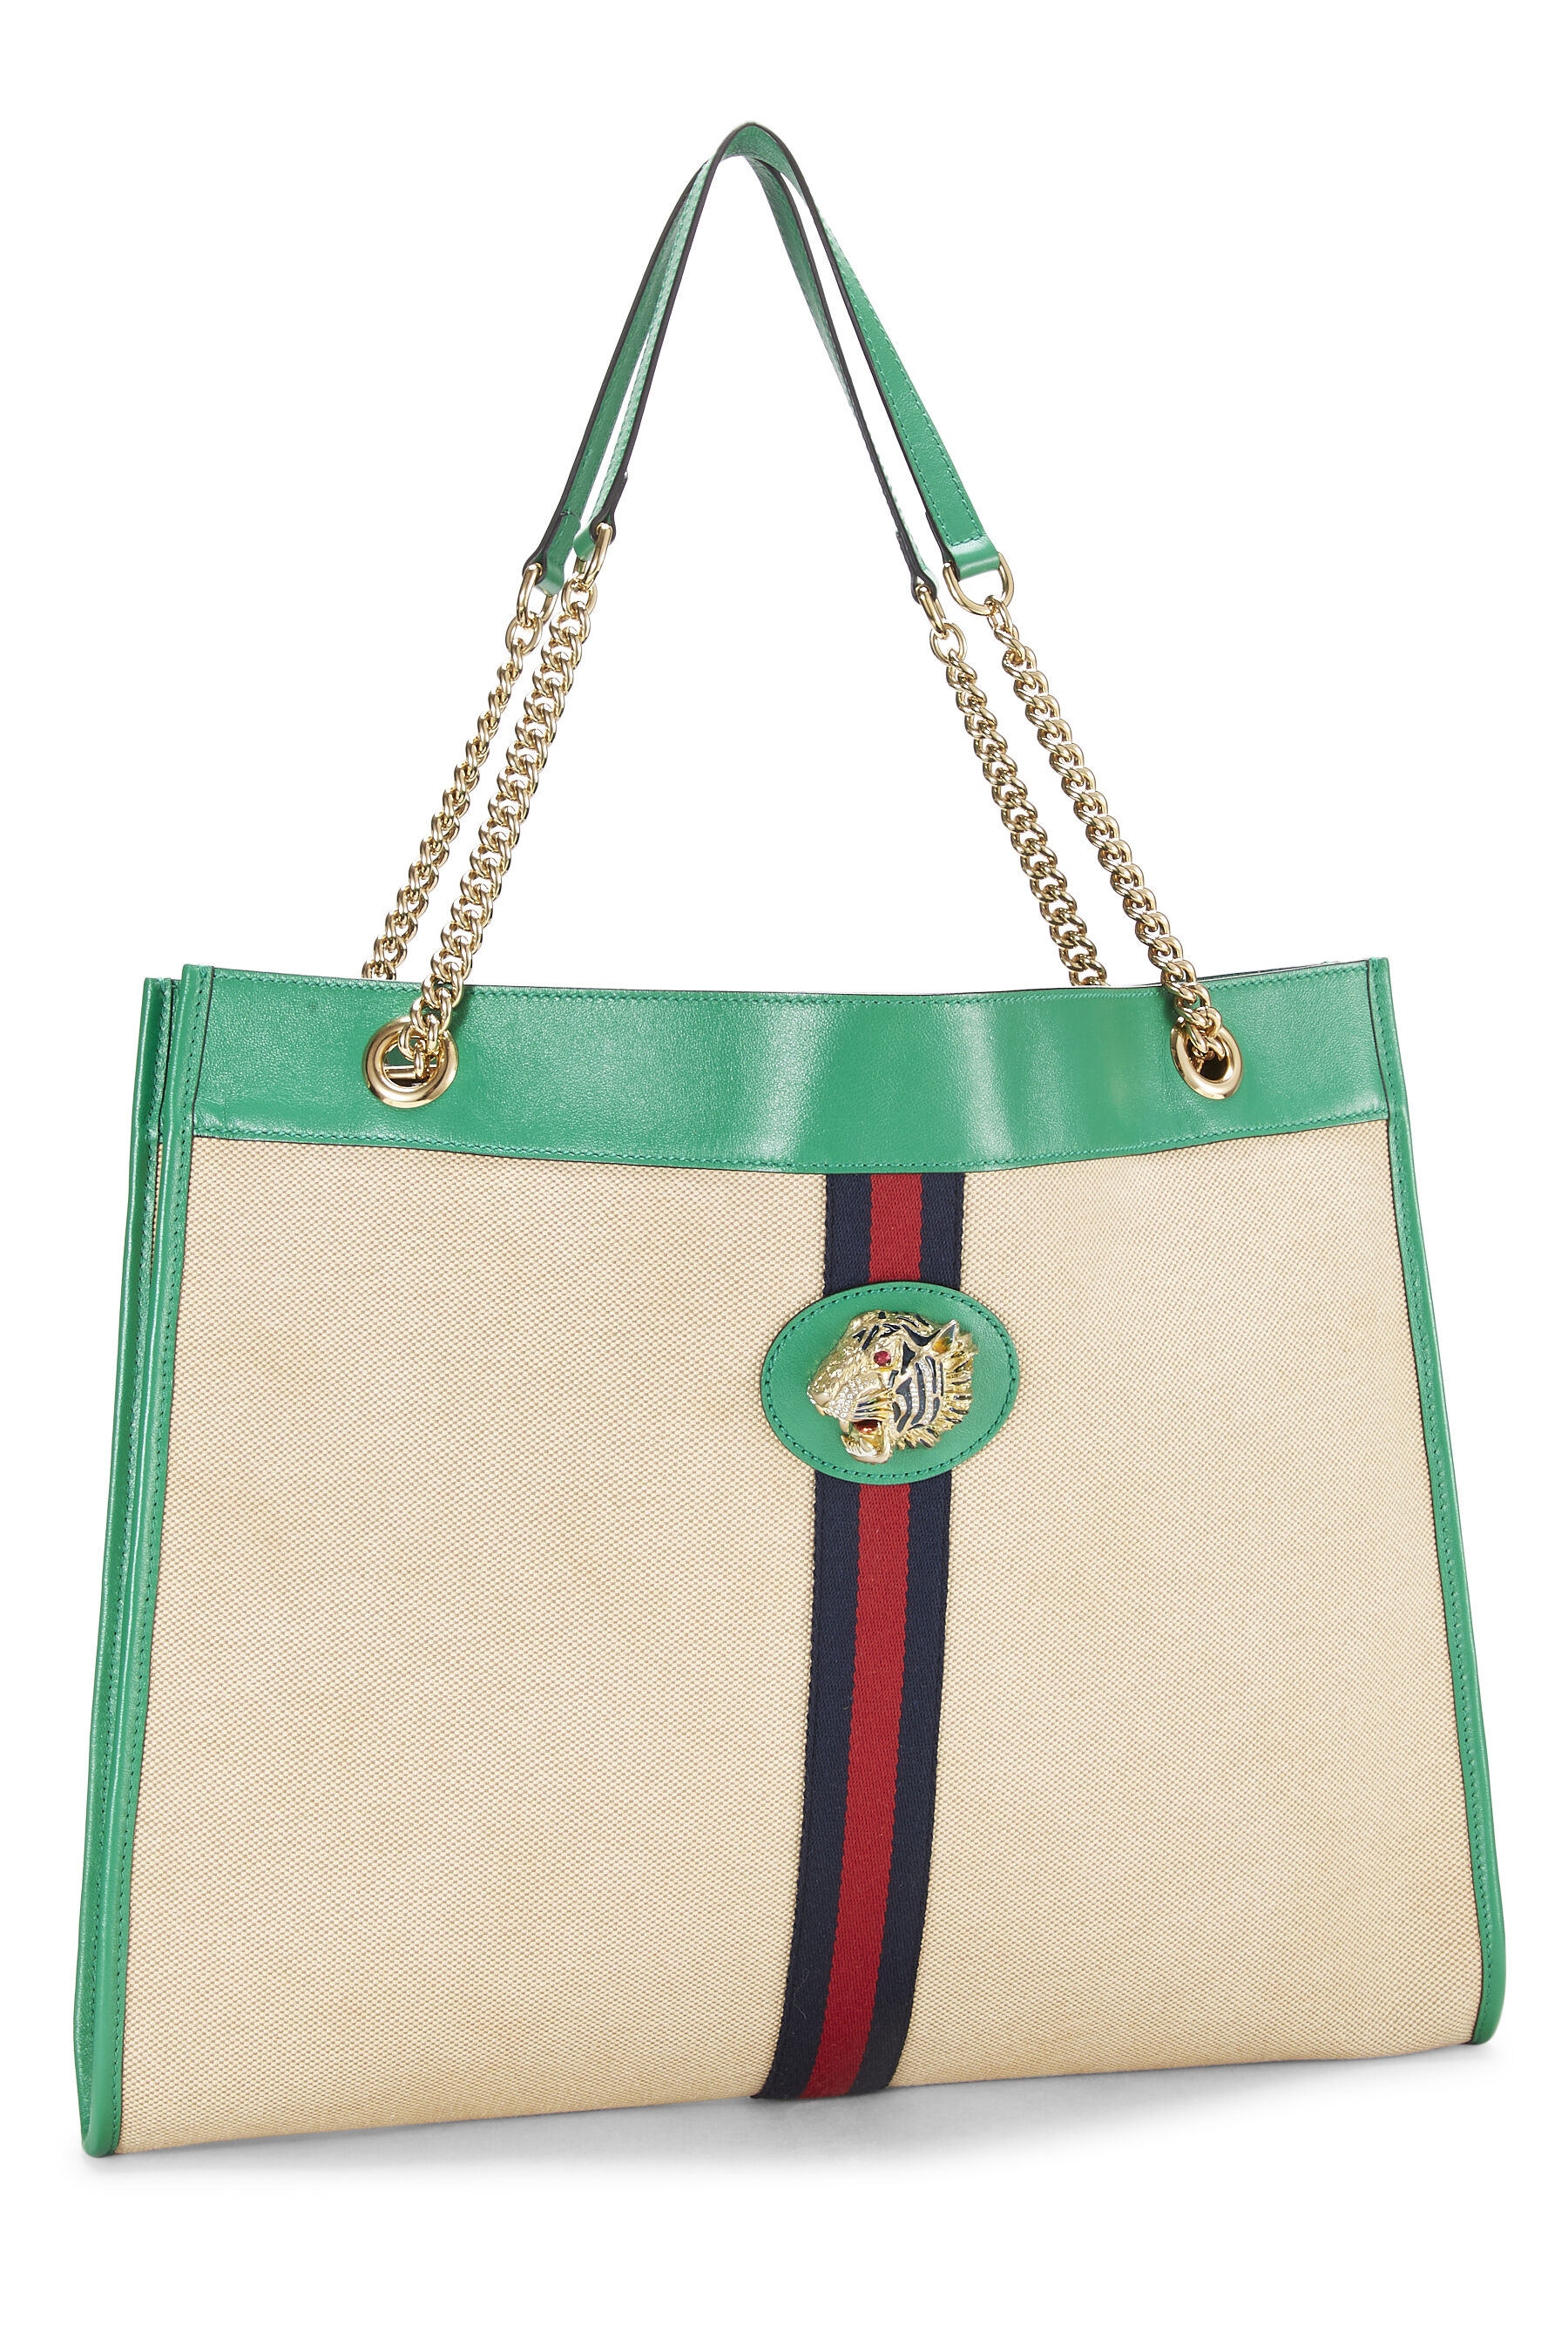 Brand New - Authentic GUCCI Rajah Tote With Pouch Nigeria | Ubuy